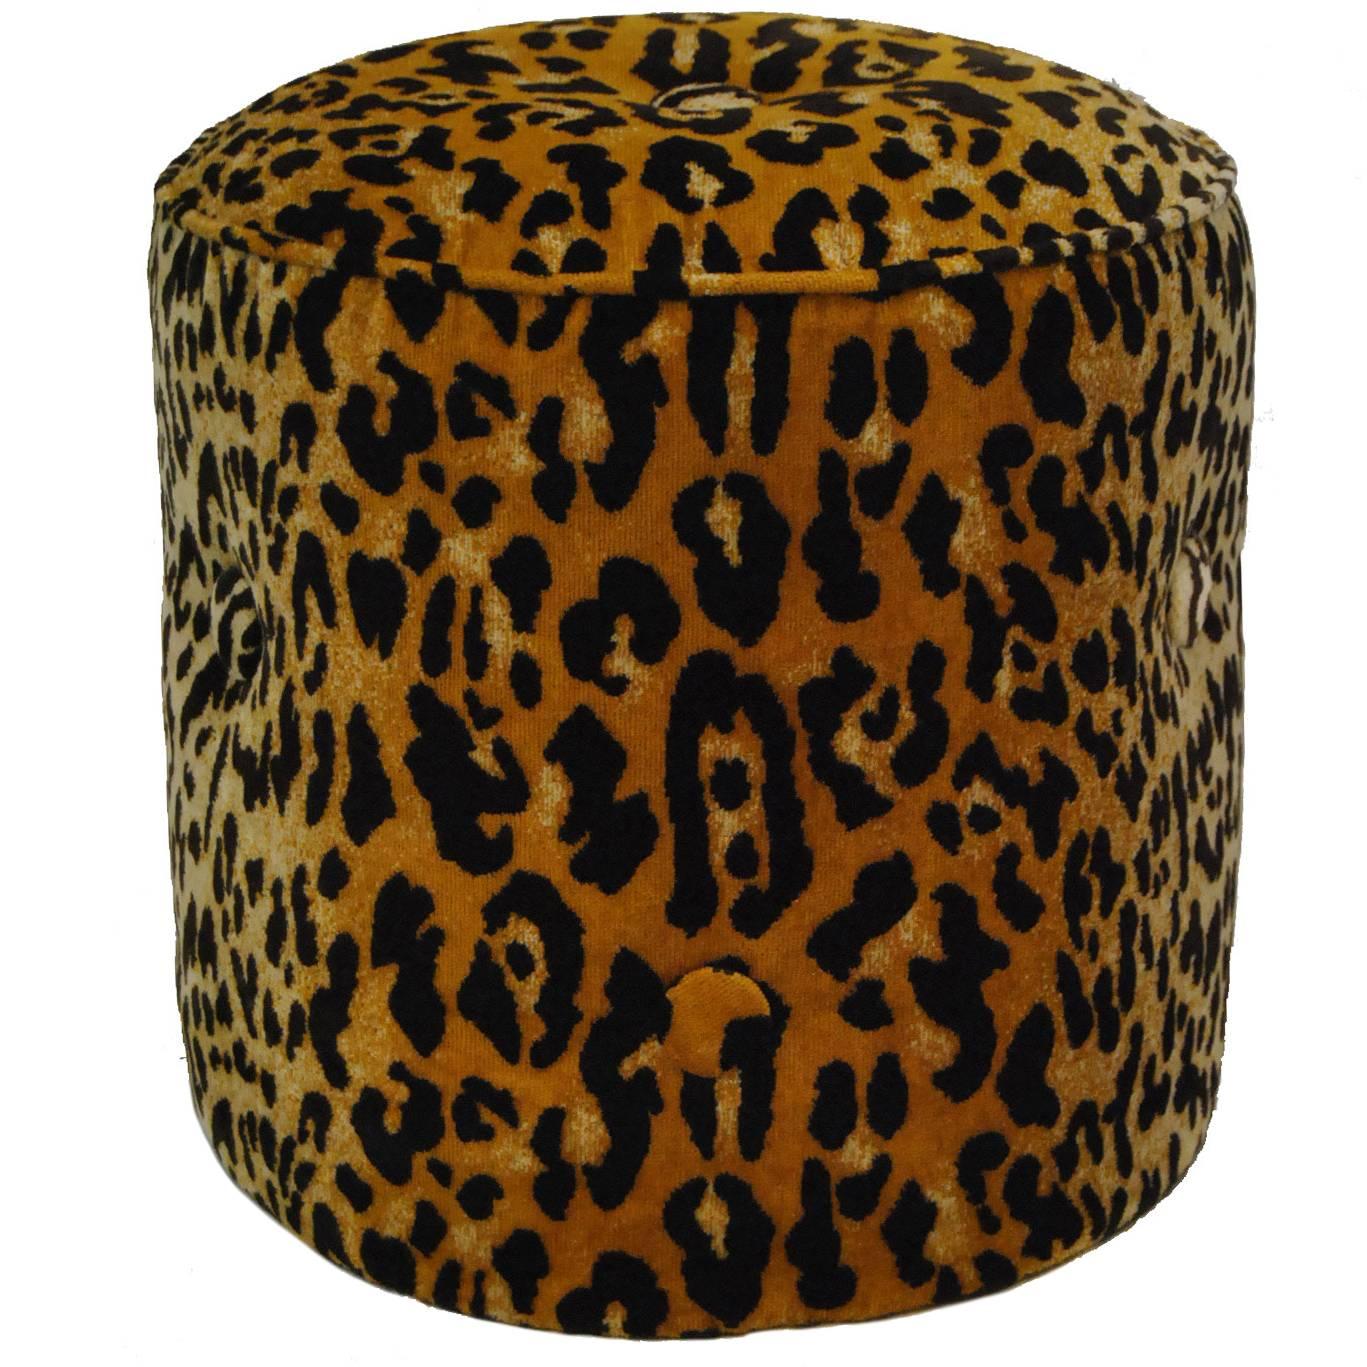 Elsie Tabouret Animal Print Ottoman or Stool by Tony Duquette for Baker No. 1697